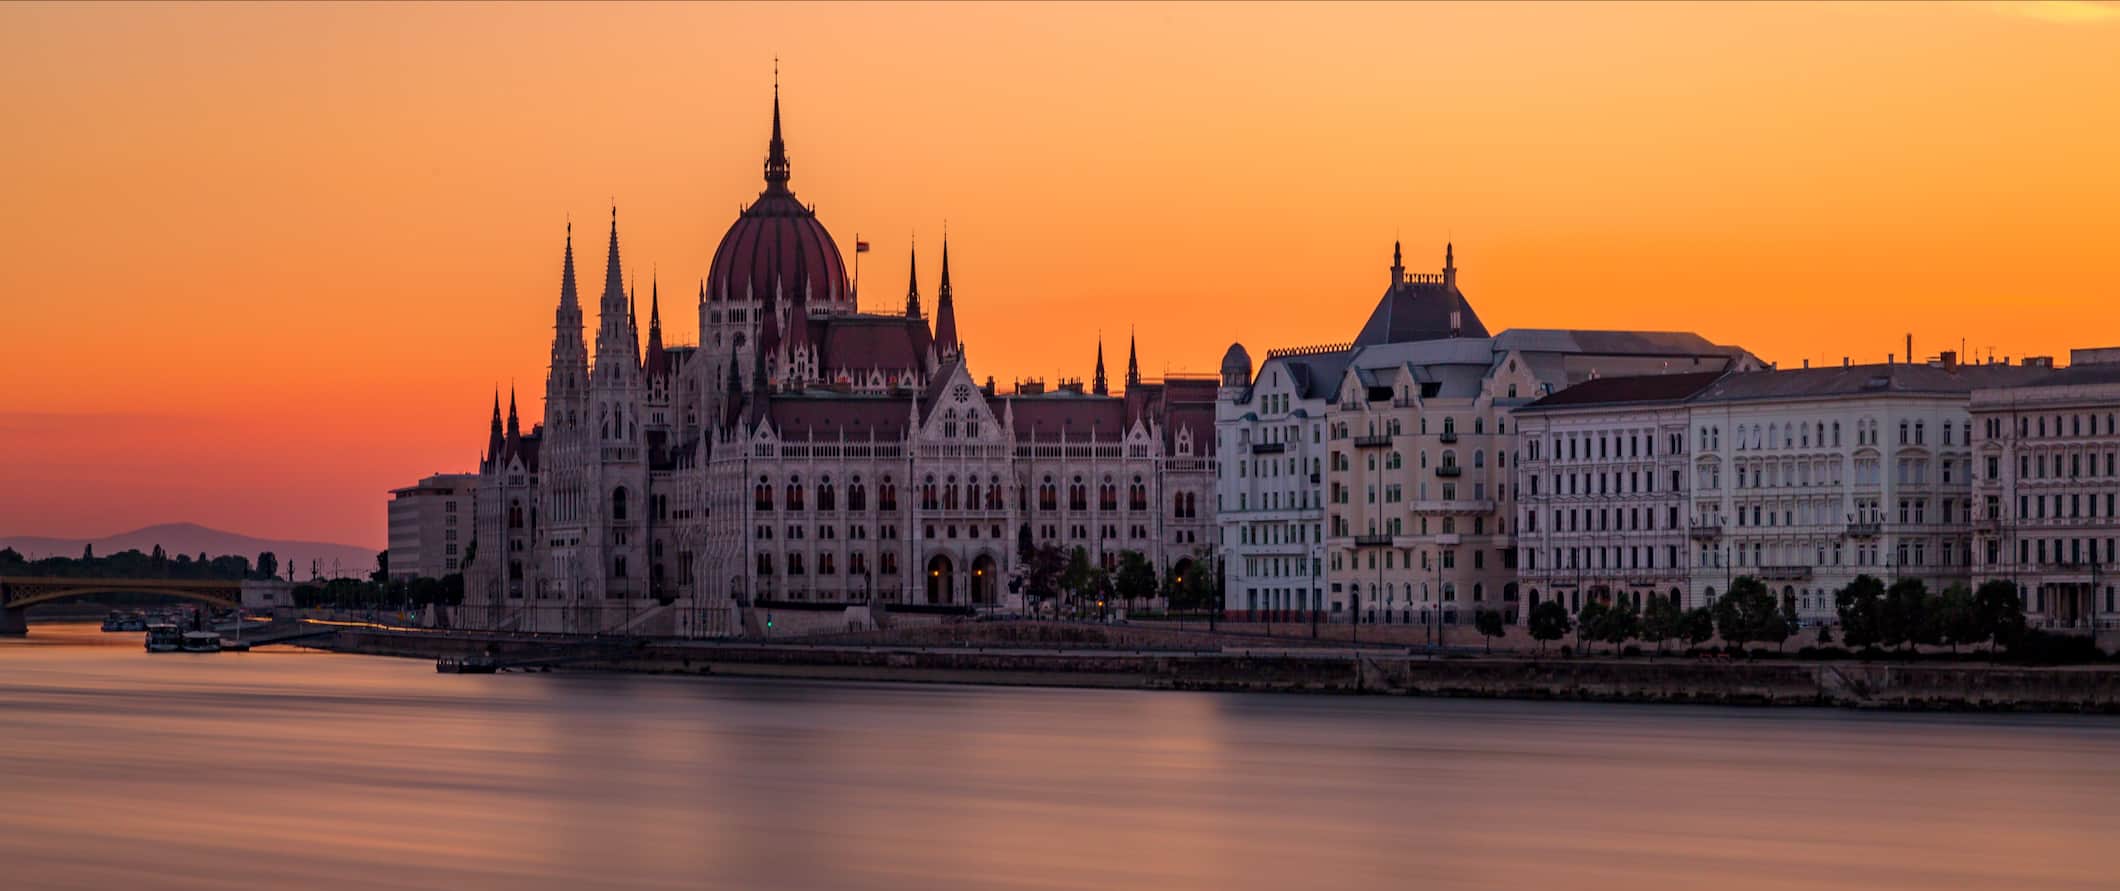 A bright orange sunset over the Danube in beautiful Budapest, Hungary